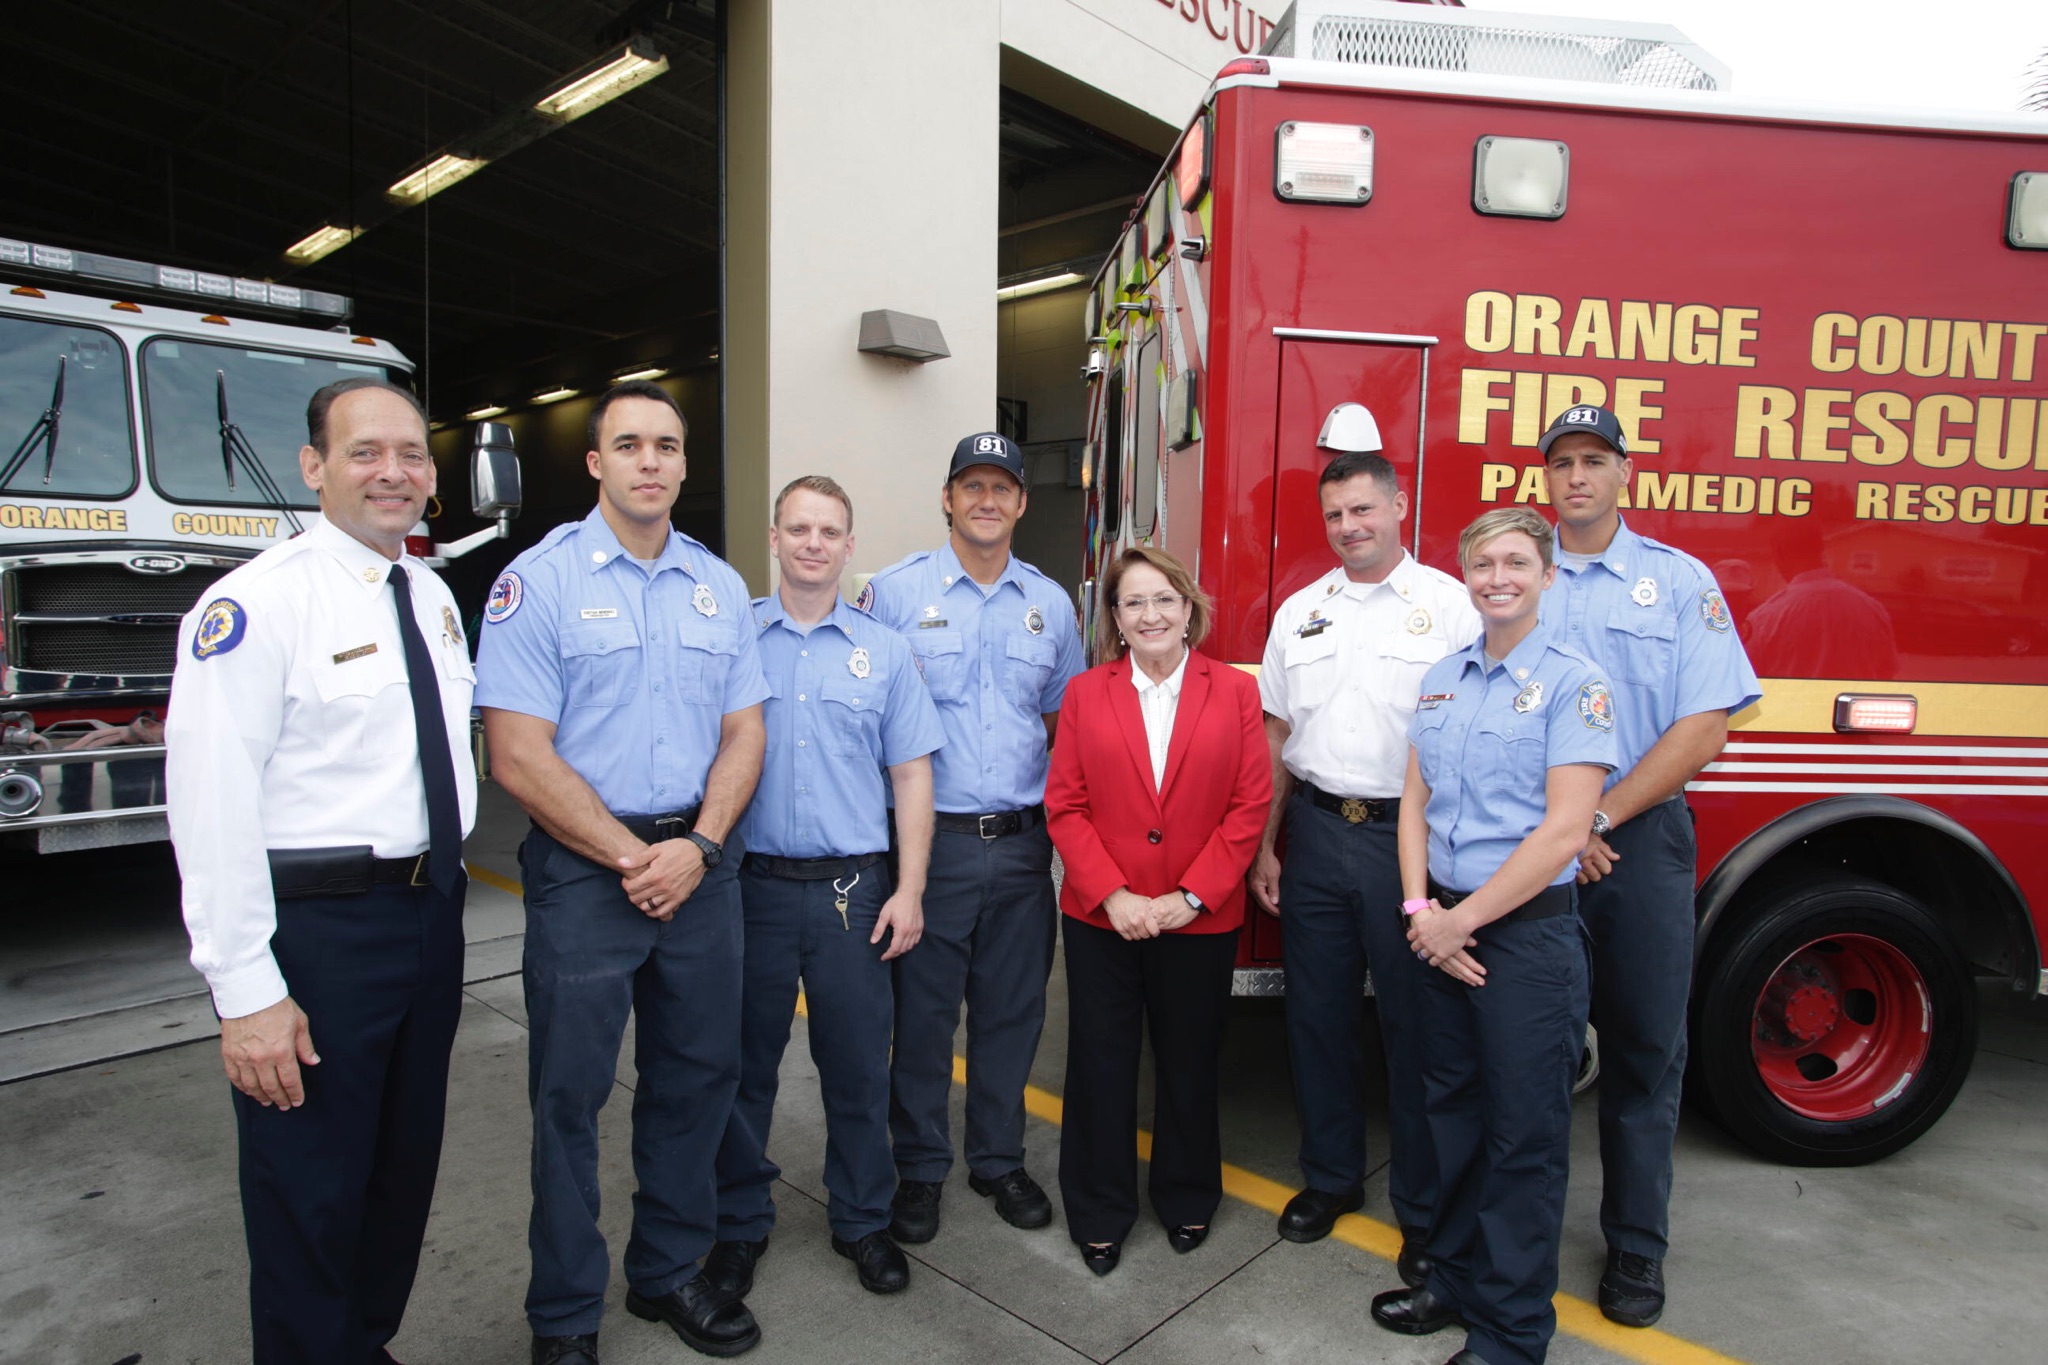 Mayor Jacobs, Chief Drozd, and some first responders stand for a picture at a fire station